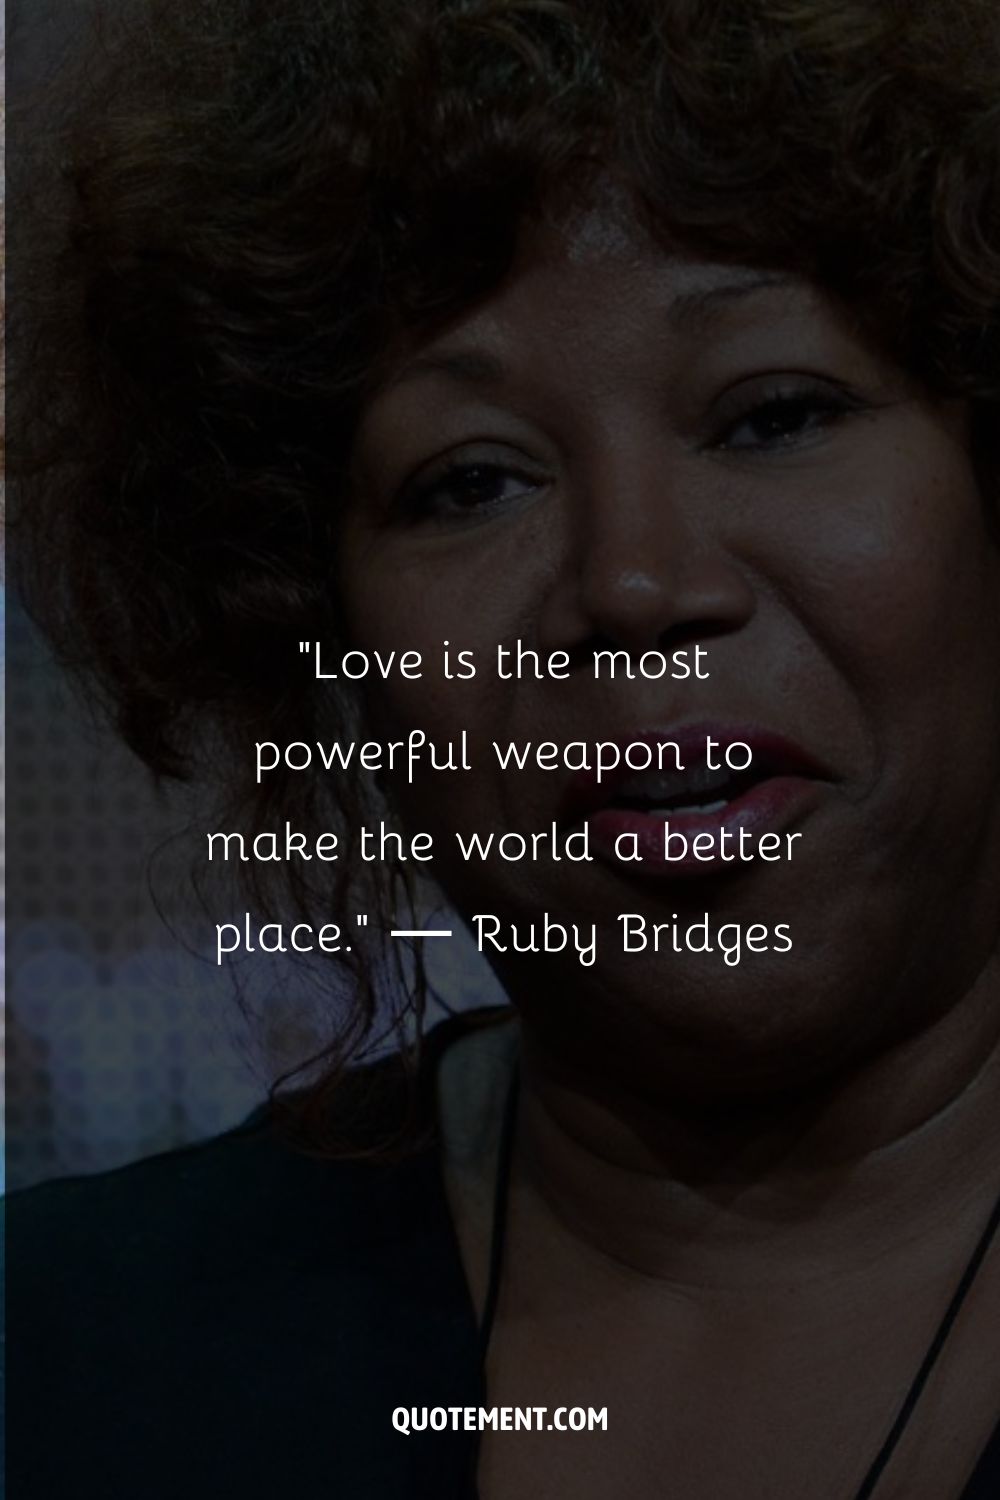 Love is the most powerful weapon to make the world a better place